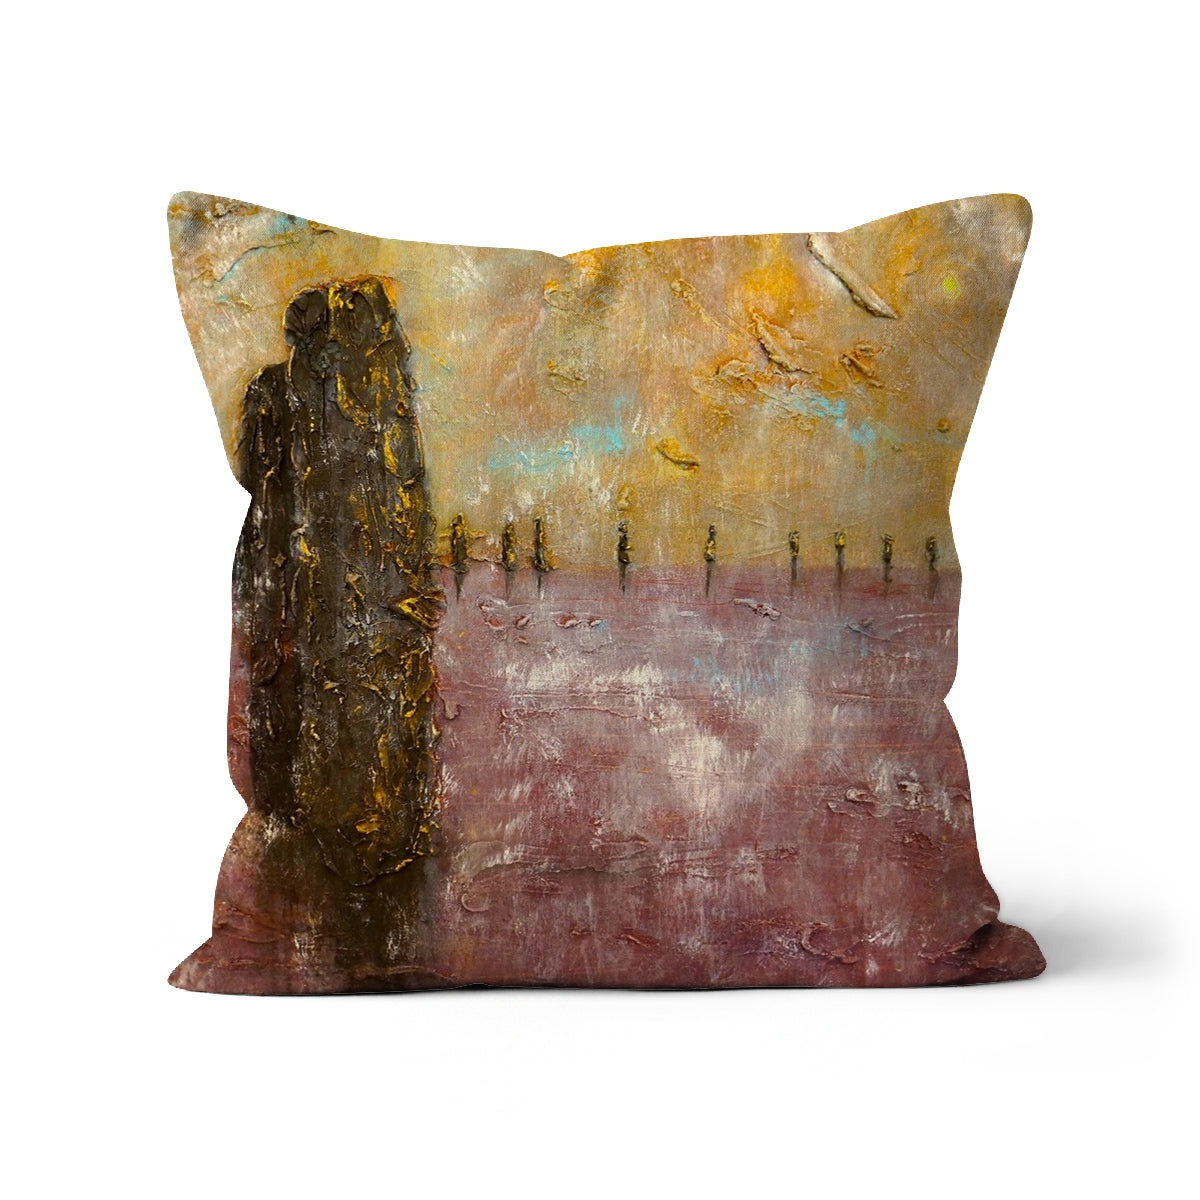 Bordgar Mist Orkney Art Gifts Cushion-Cushions-Orkney Art Gallery-Faux Suede-12"x12"-Paintings, Prints, Homeware, Art Gifts From Scotland By Scottish Artist Kevin Hunter